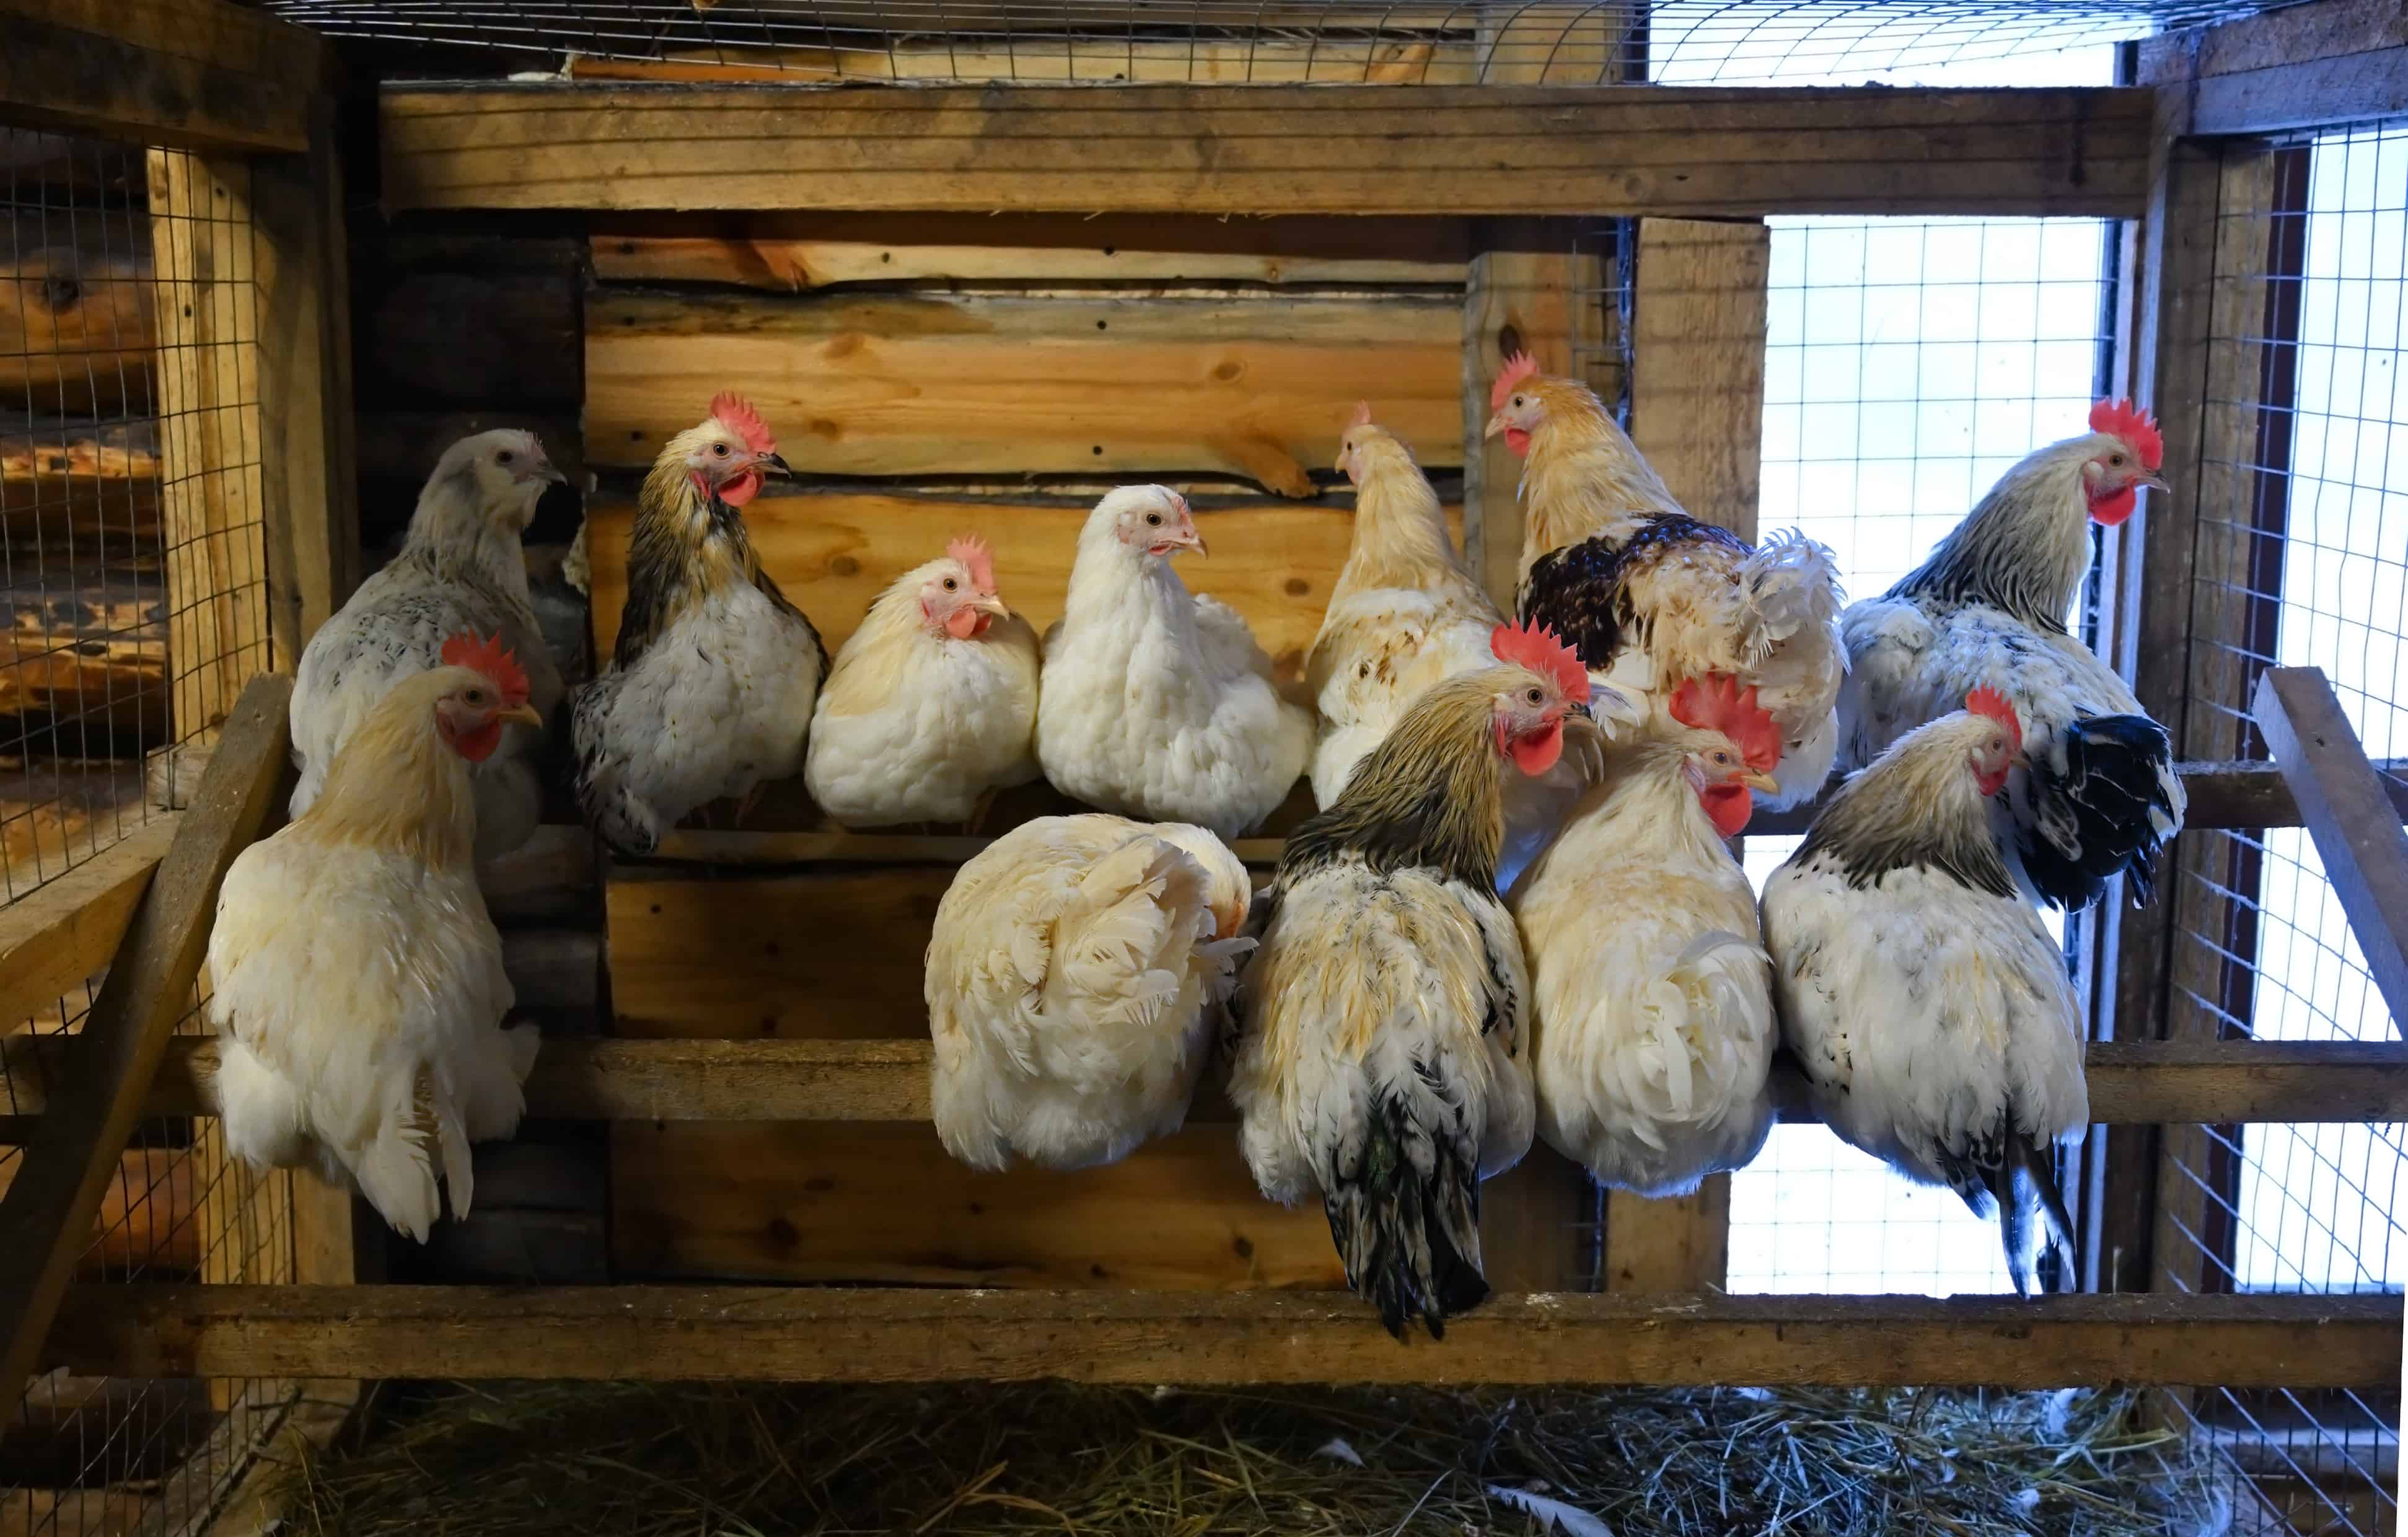 Dozen chickens settled comfortably, perched and roosting within the confines of the chicken coop